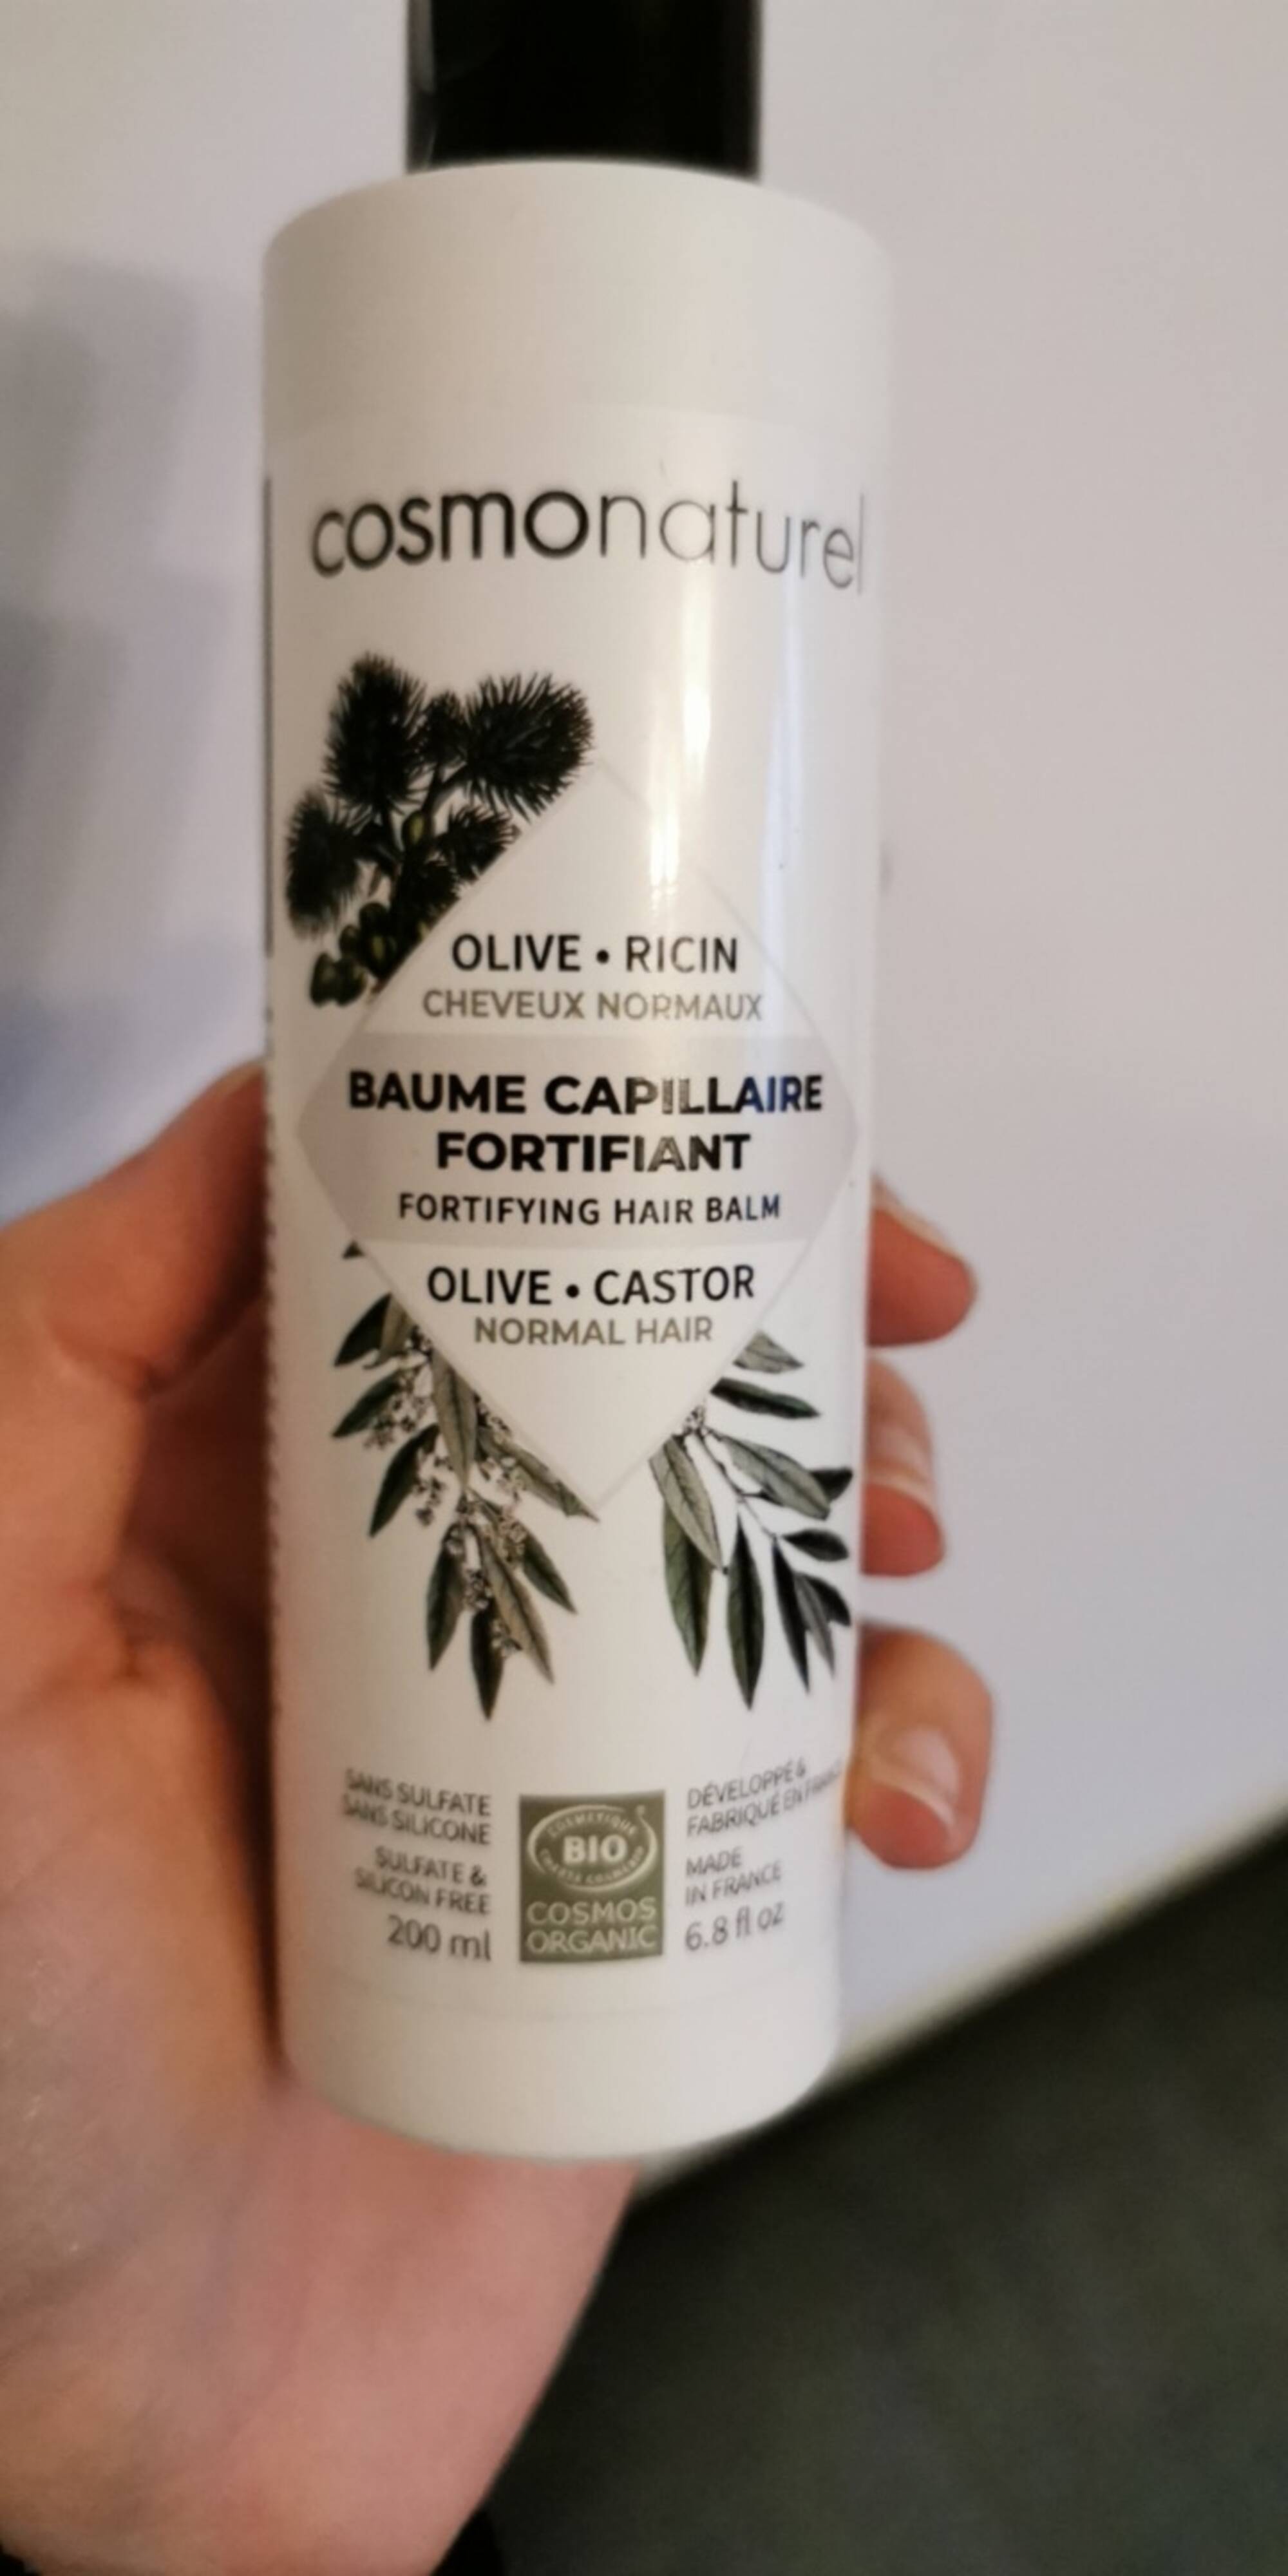 COSMO NATUREL - Baume capillaire fortifiant bio